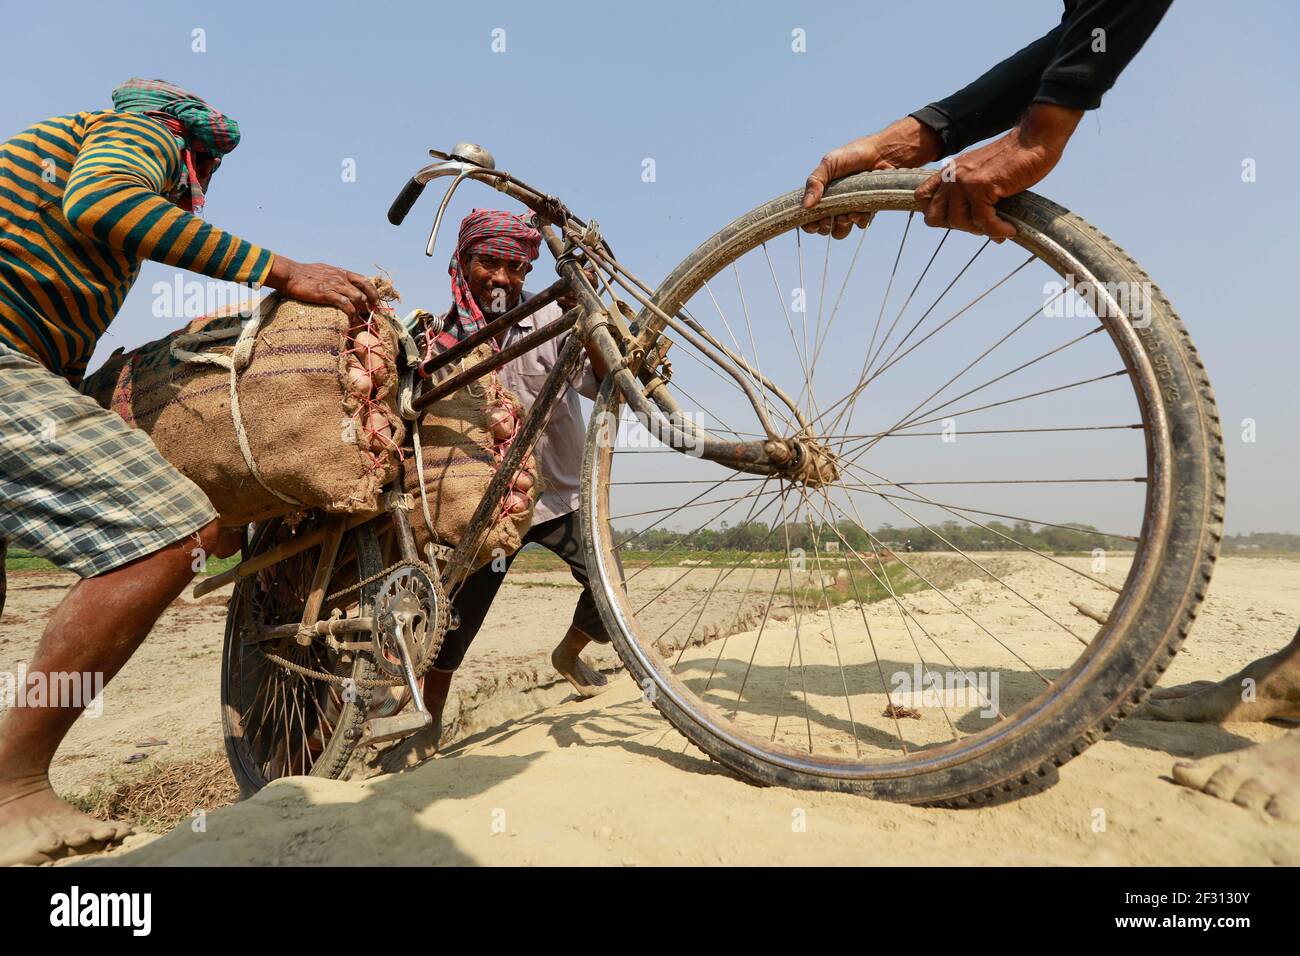 Munshigonj, Bangladesh. 14th Mar, 2021. Bangladeshi farmers carry potato on their bicycles at a village in Munshiganj, near Dhaka, Bangladesh, March 14, 2021. As the winter season draws to an end, the farmers get busy harvesting potatoes from the fields. Following a bumper production of potatoes this year, the farmers are now waiting to get a fair price for their harvests. Credit: Suvra Kanti Das/ZUMA Wire/Alamy Live News Stock Photo